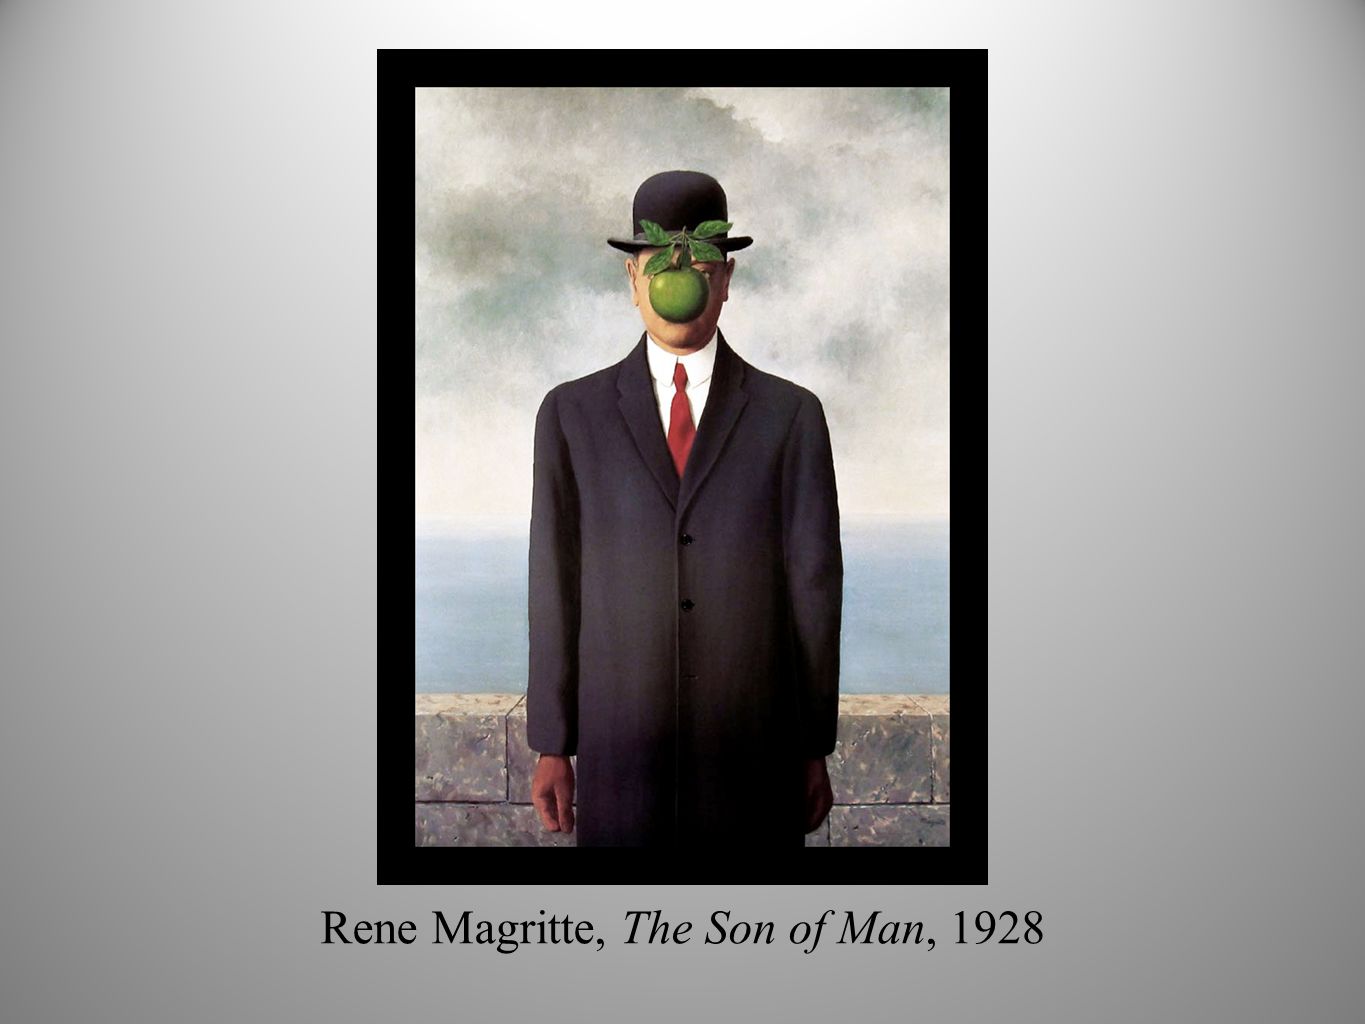 Rene Magritte, The Son of Man, 1928